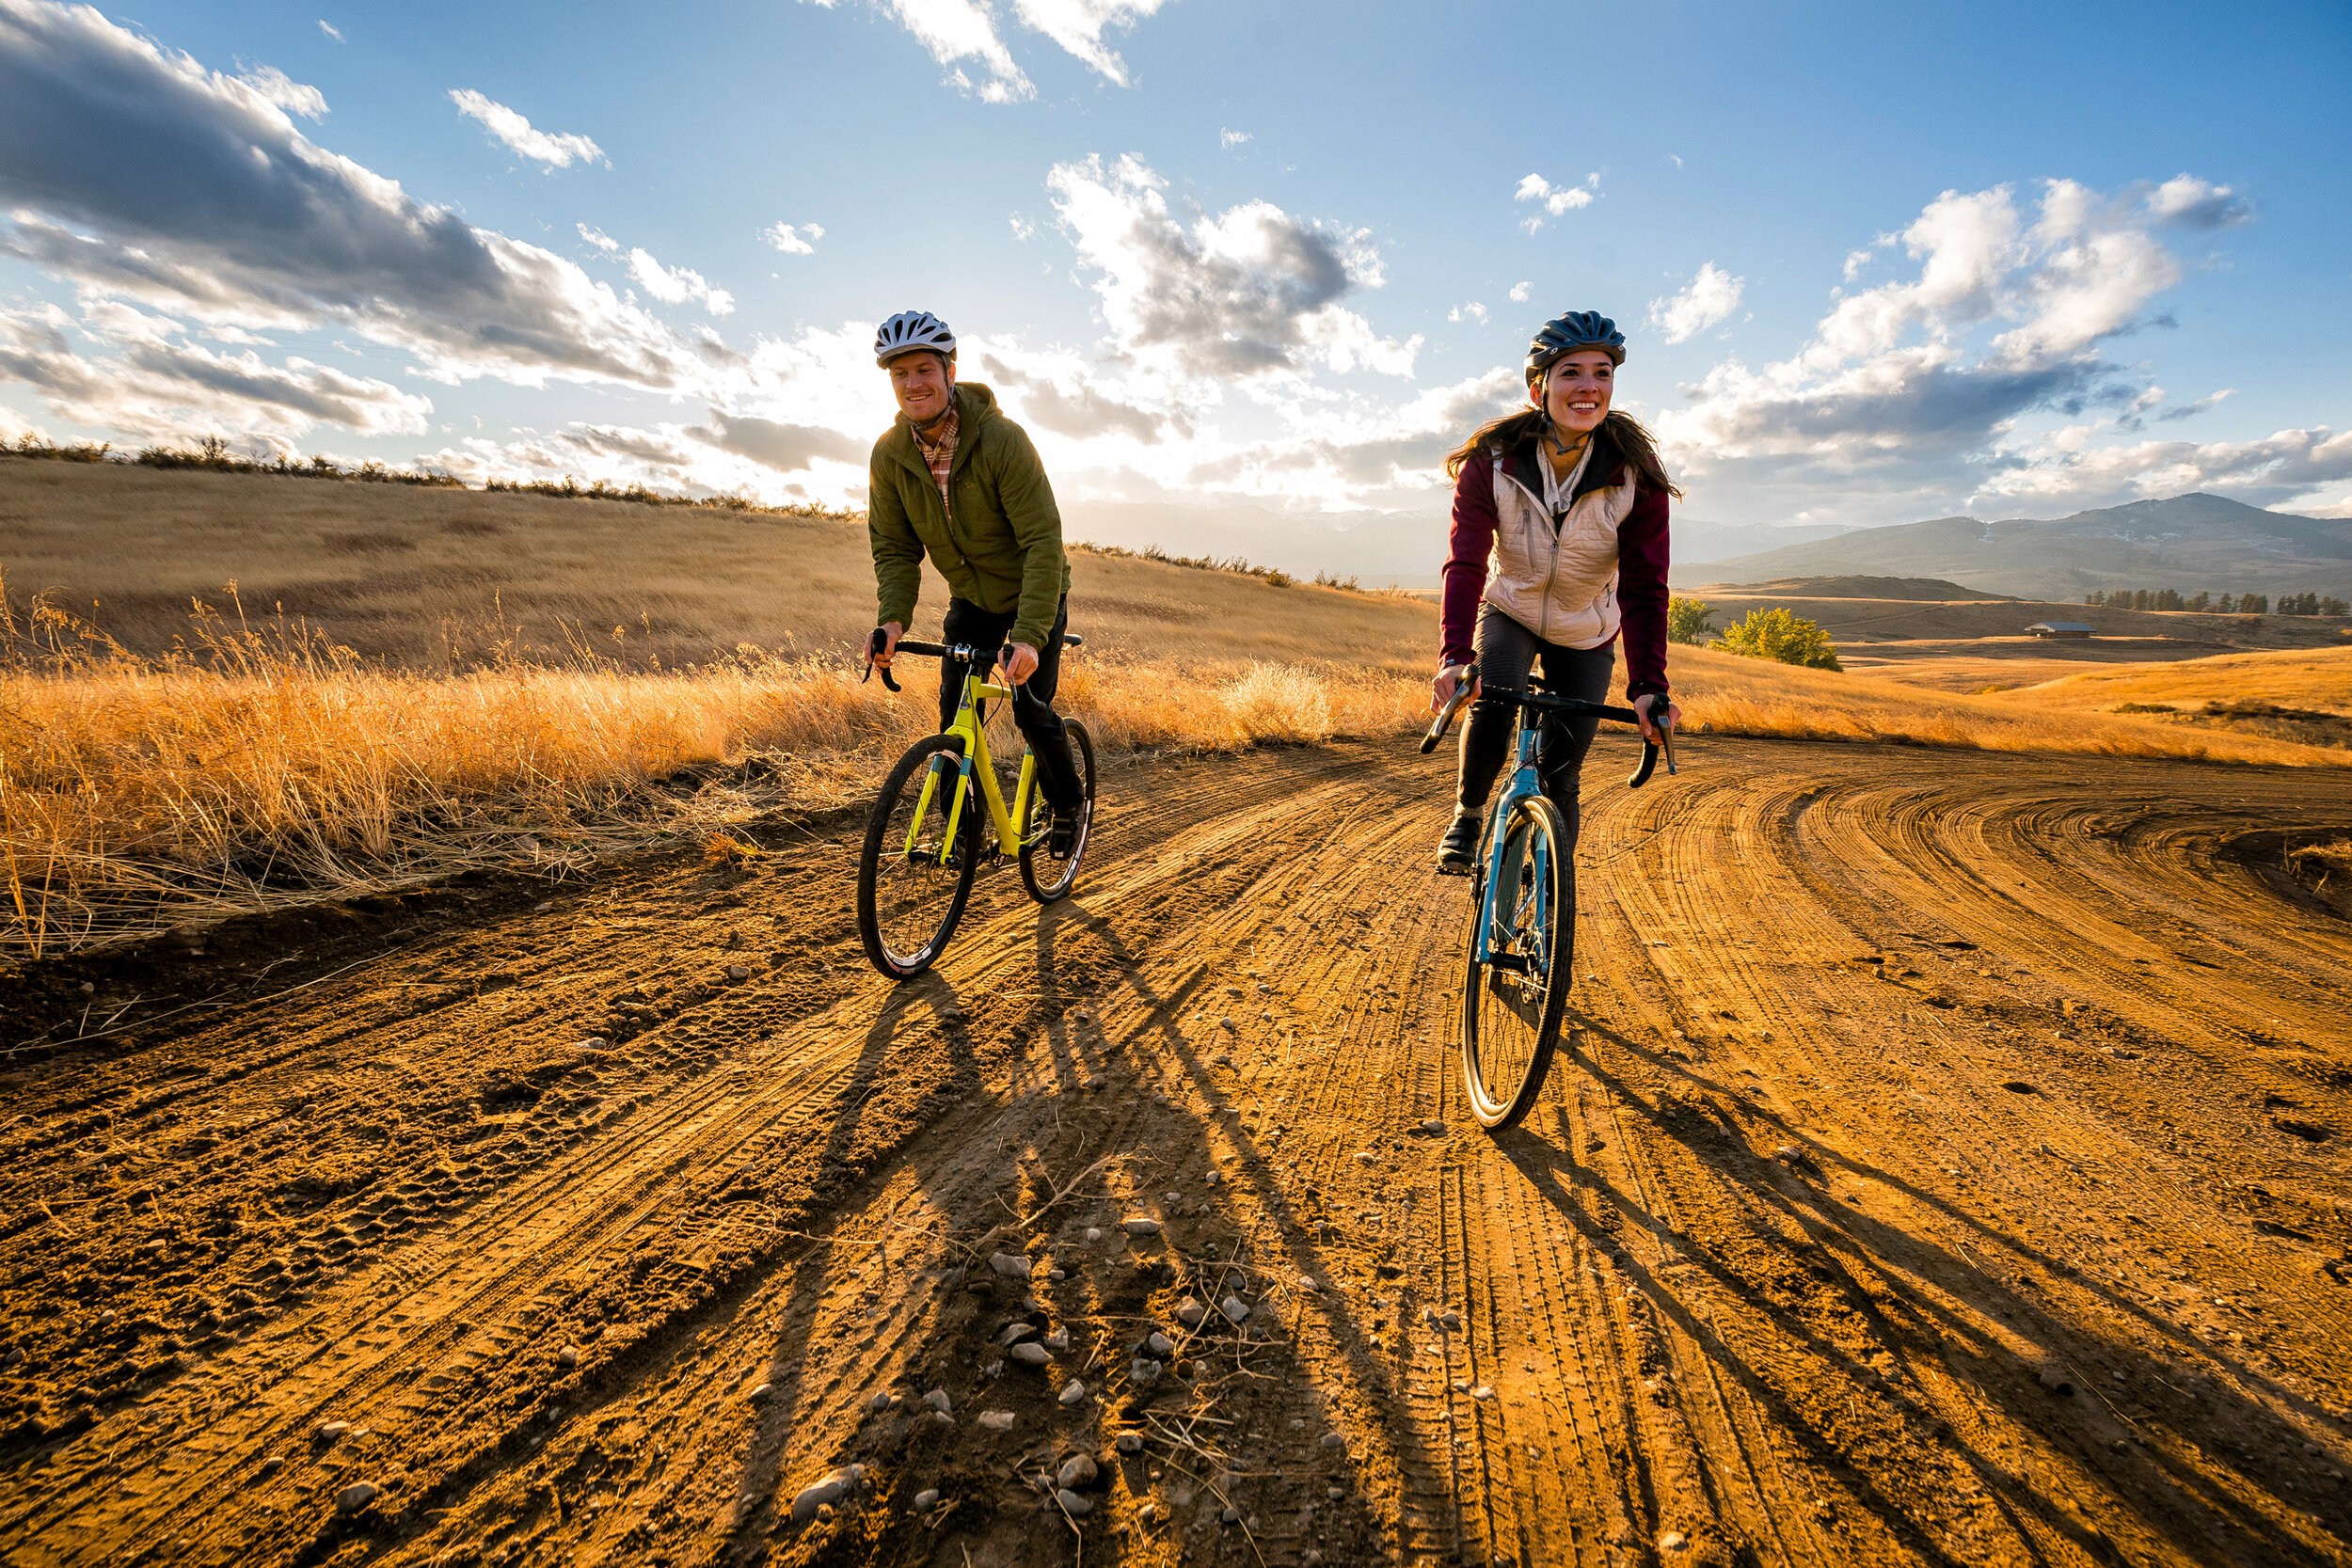  Lifestyle: Sam Olive and Roslyn Luke gravel bike riding in the Methow Valley in autumn, Winthrop, Washington 